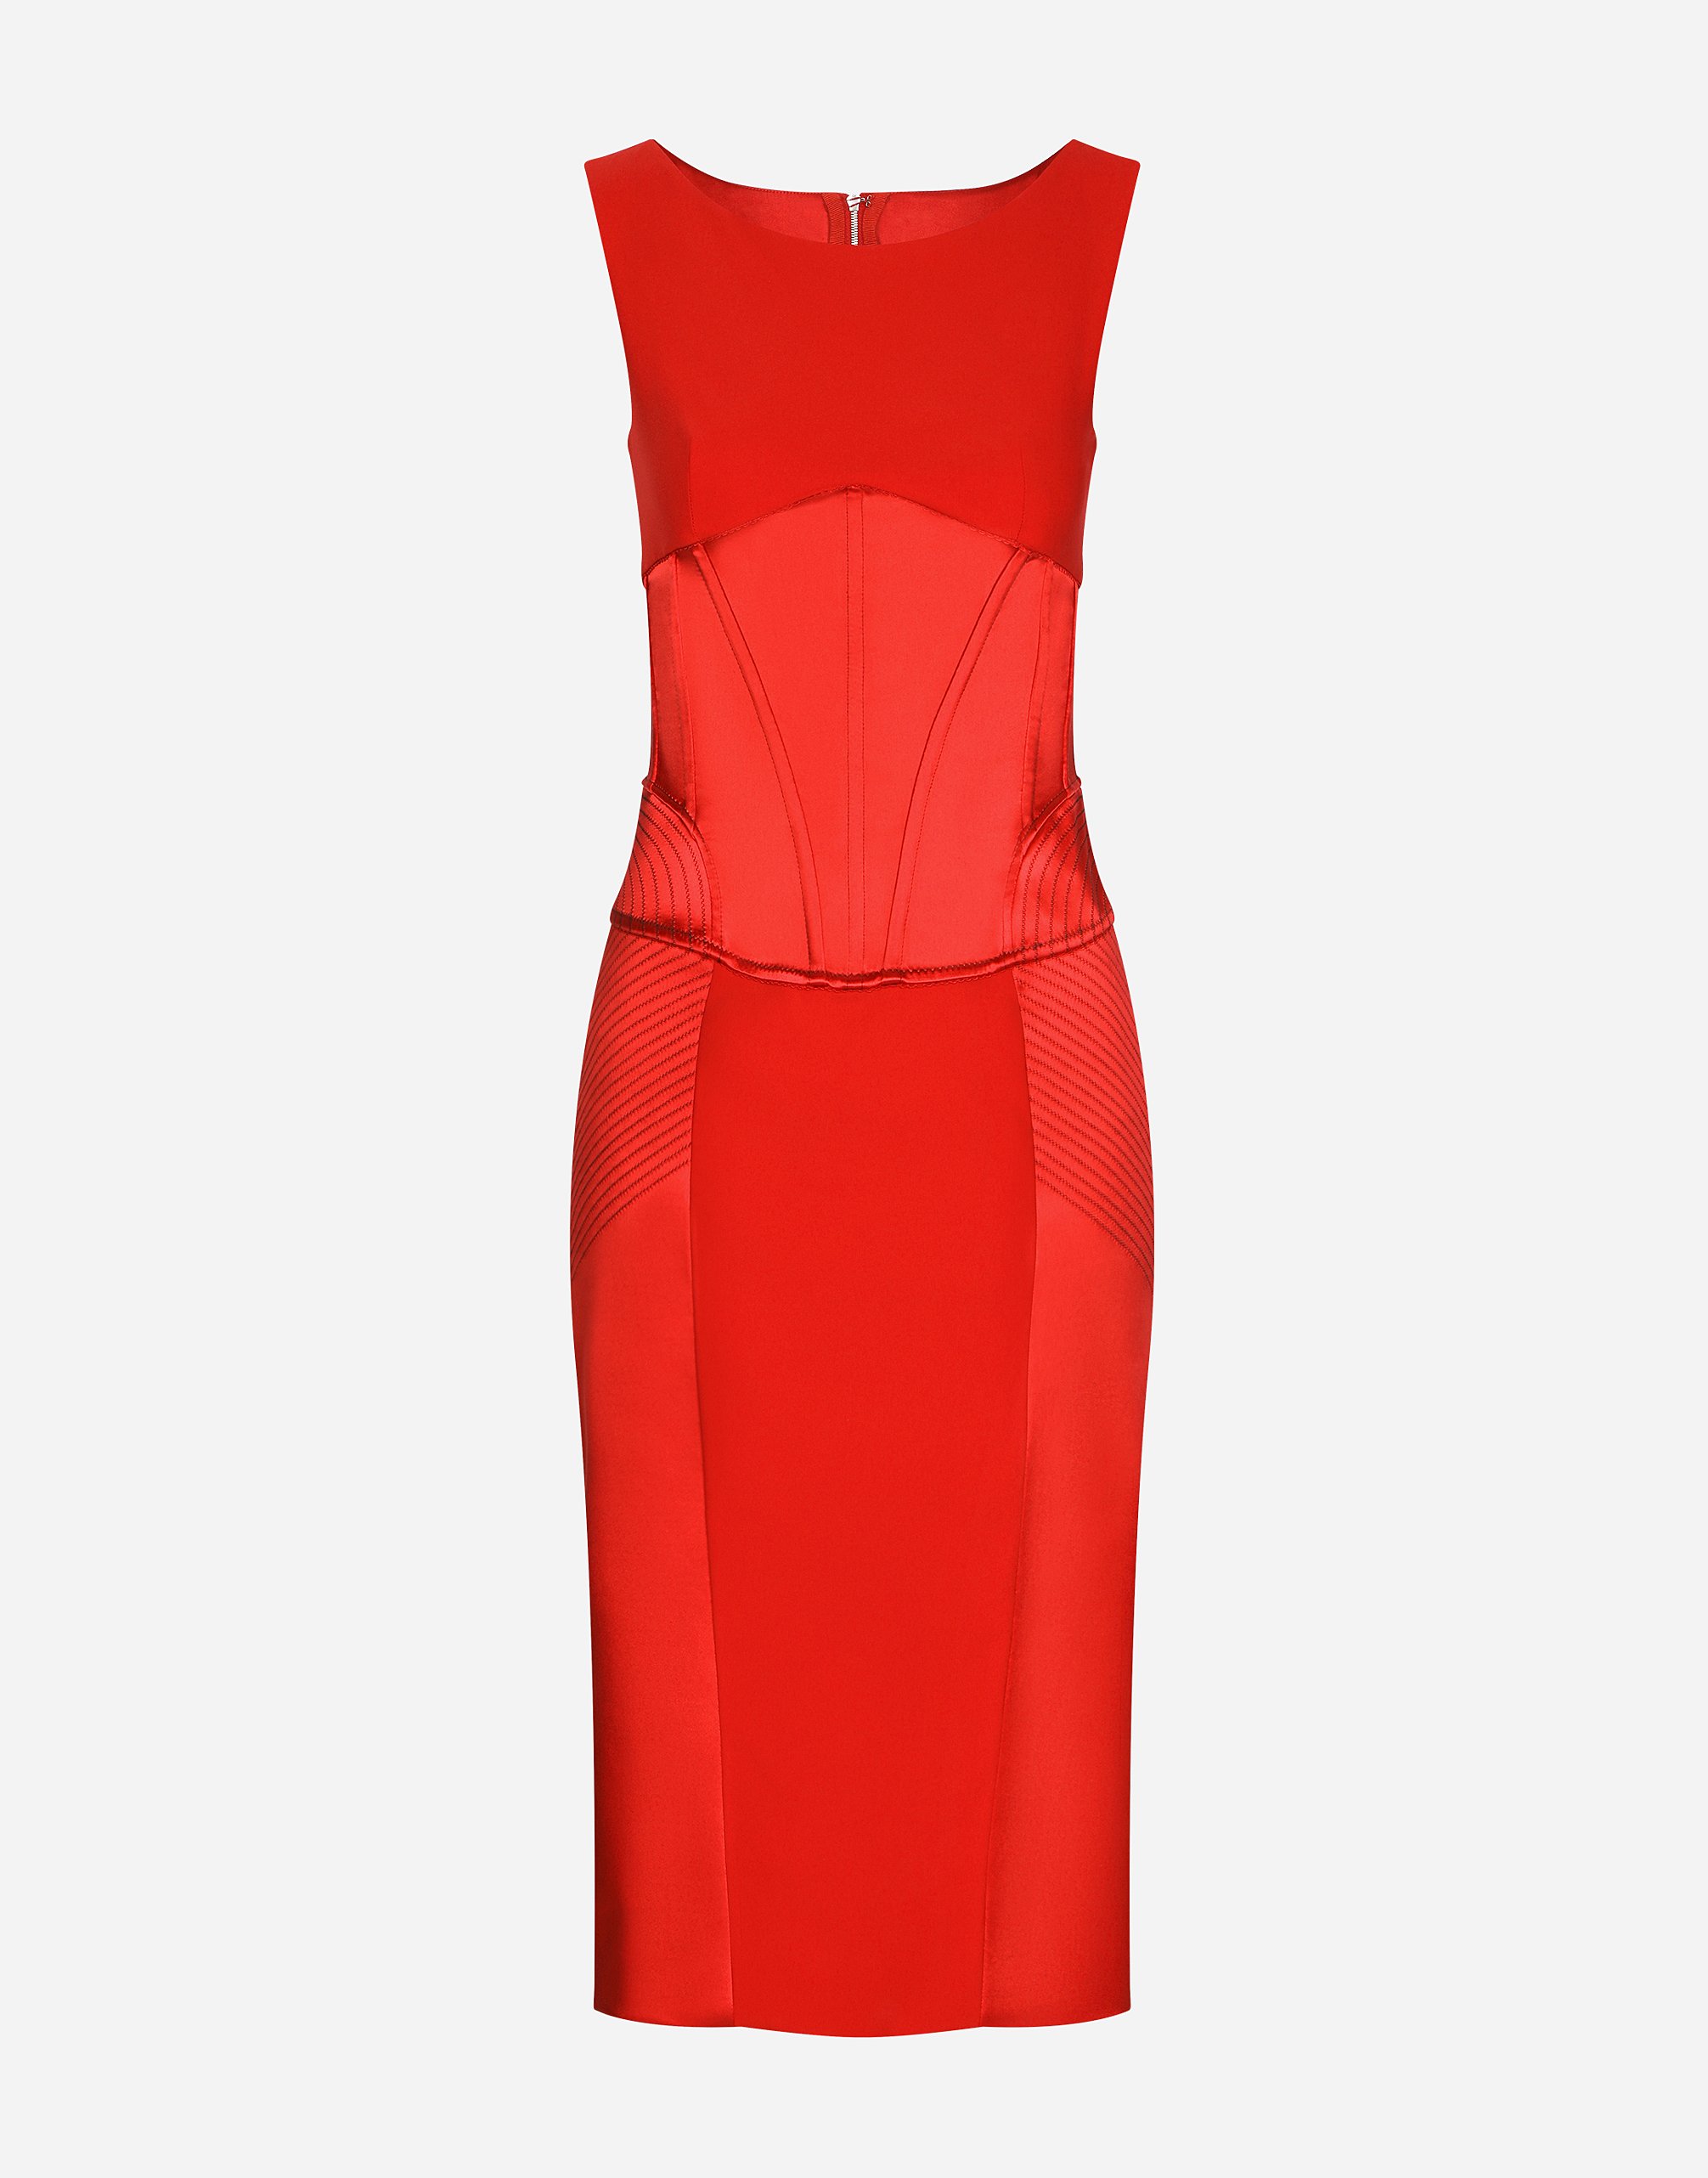 Dolce & Gabbana Satin And Cady Calf-length Dress In Blood_red